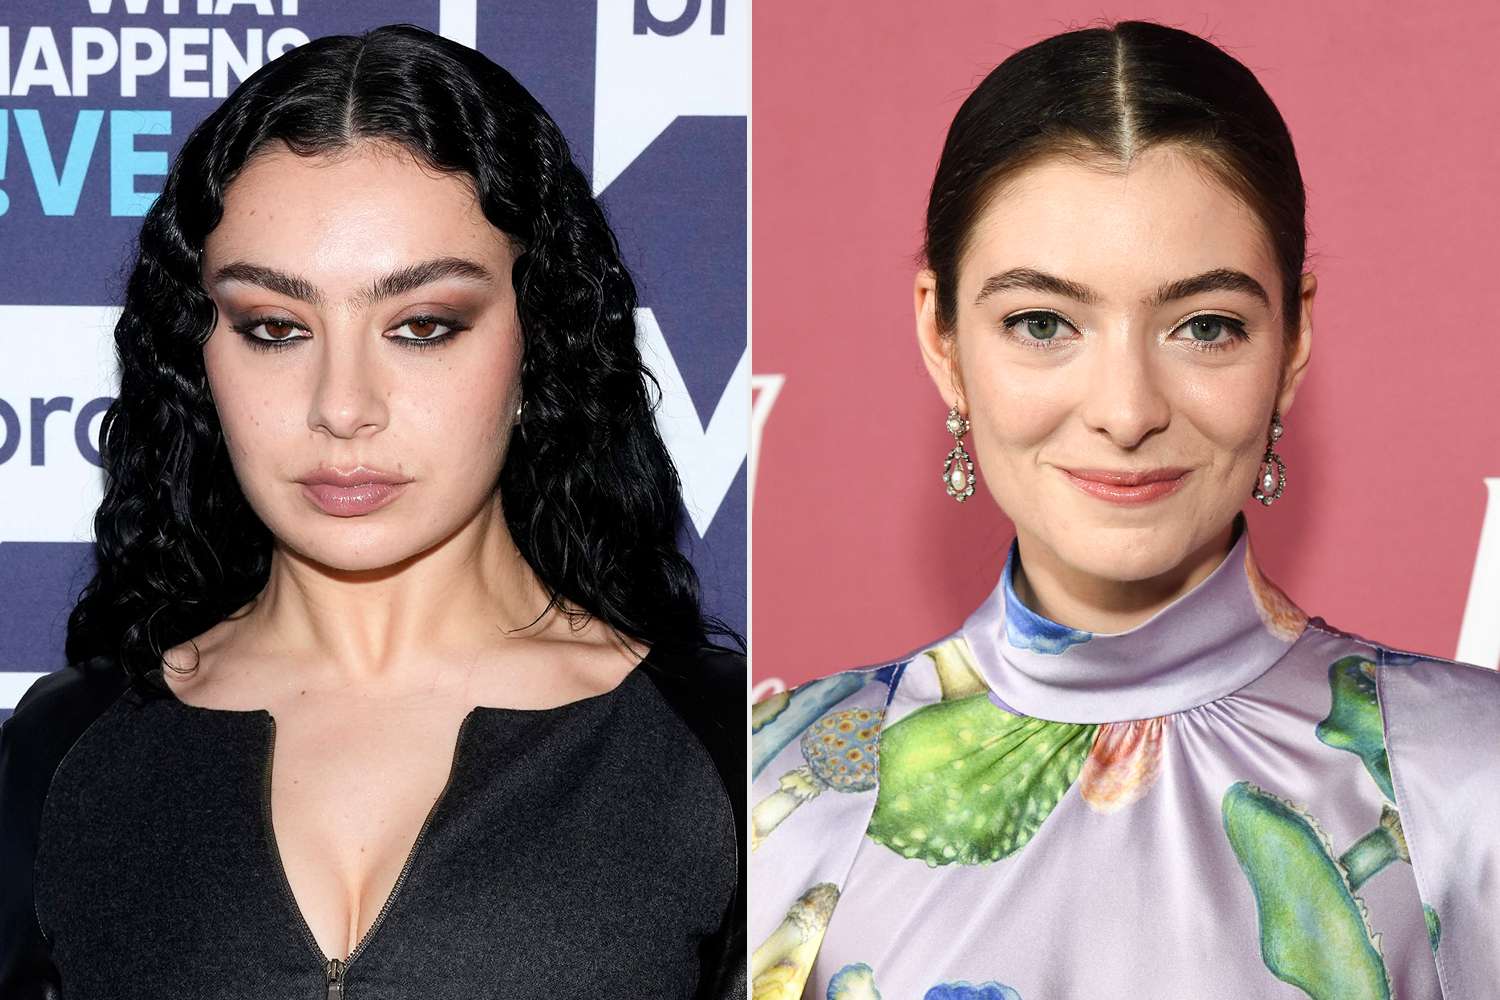 Lorde felt 'misunderstood' after hearing Charli XCX's 'Girl, So Confusing' and wanted to 'make it right'